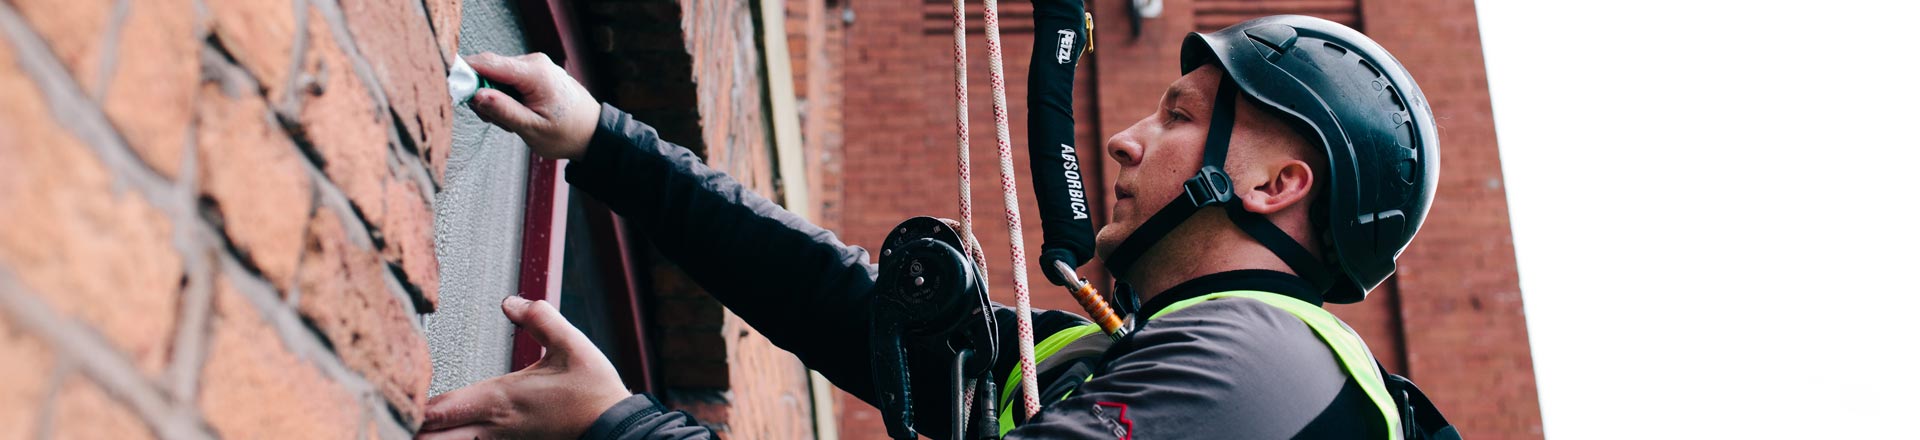 Abseiling/Rope Access Window Cleaning in London - HCS Cleaning Services